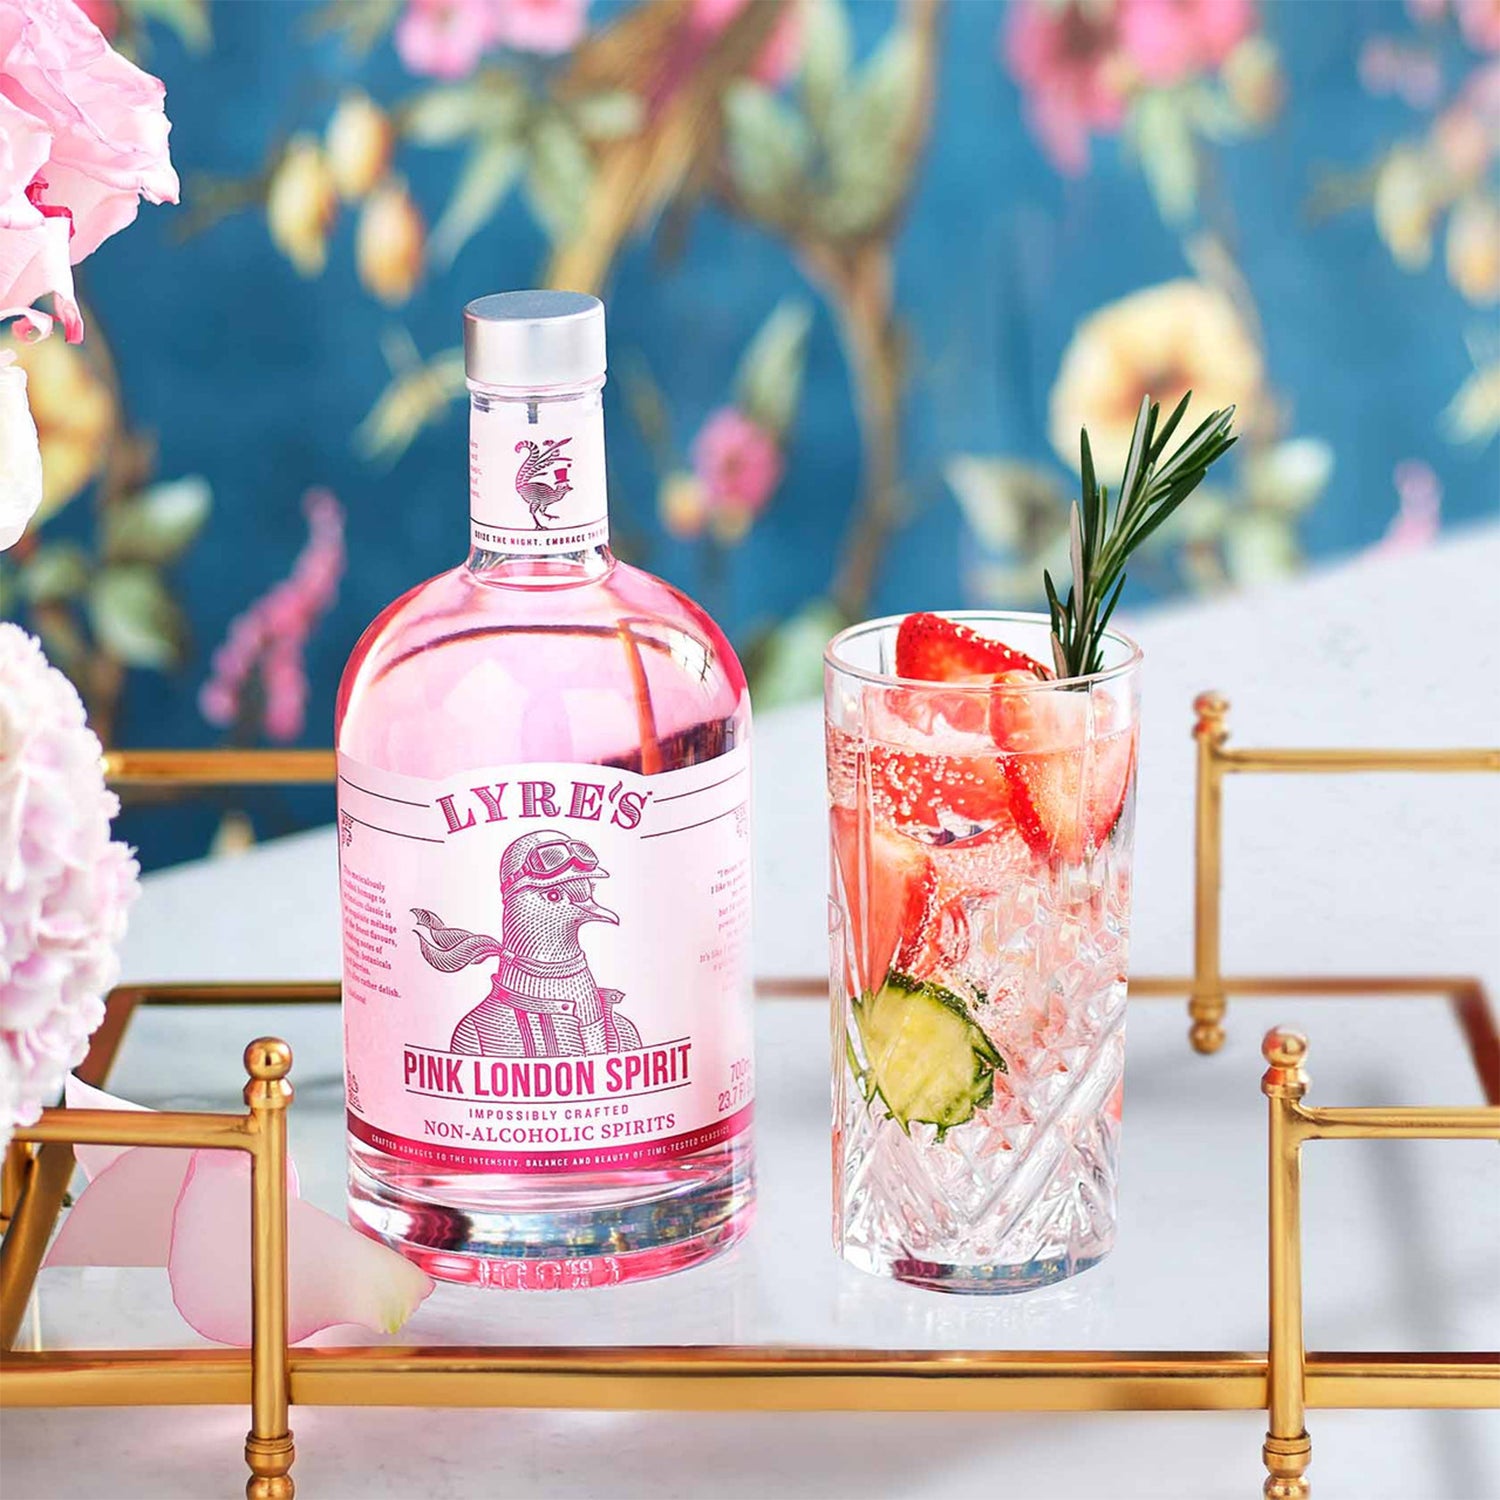 Lyre's non-alcoholic pink gin & tonic